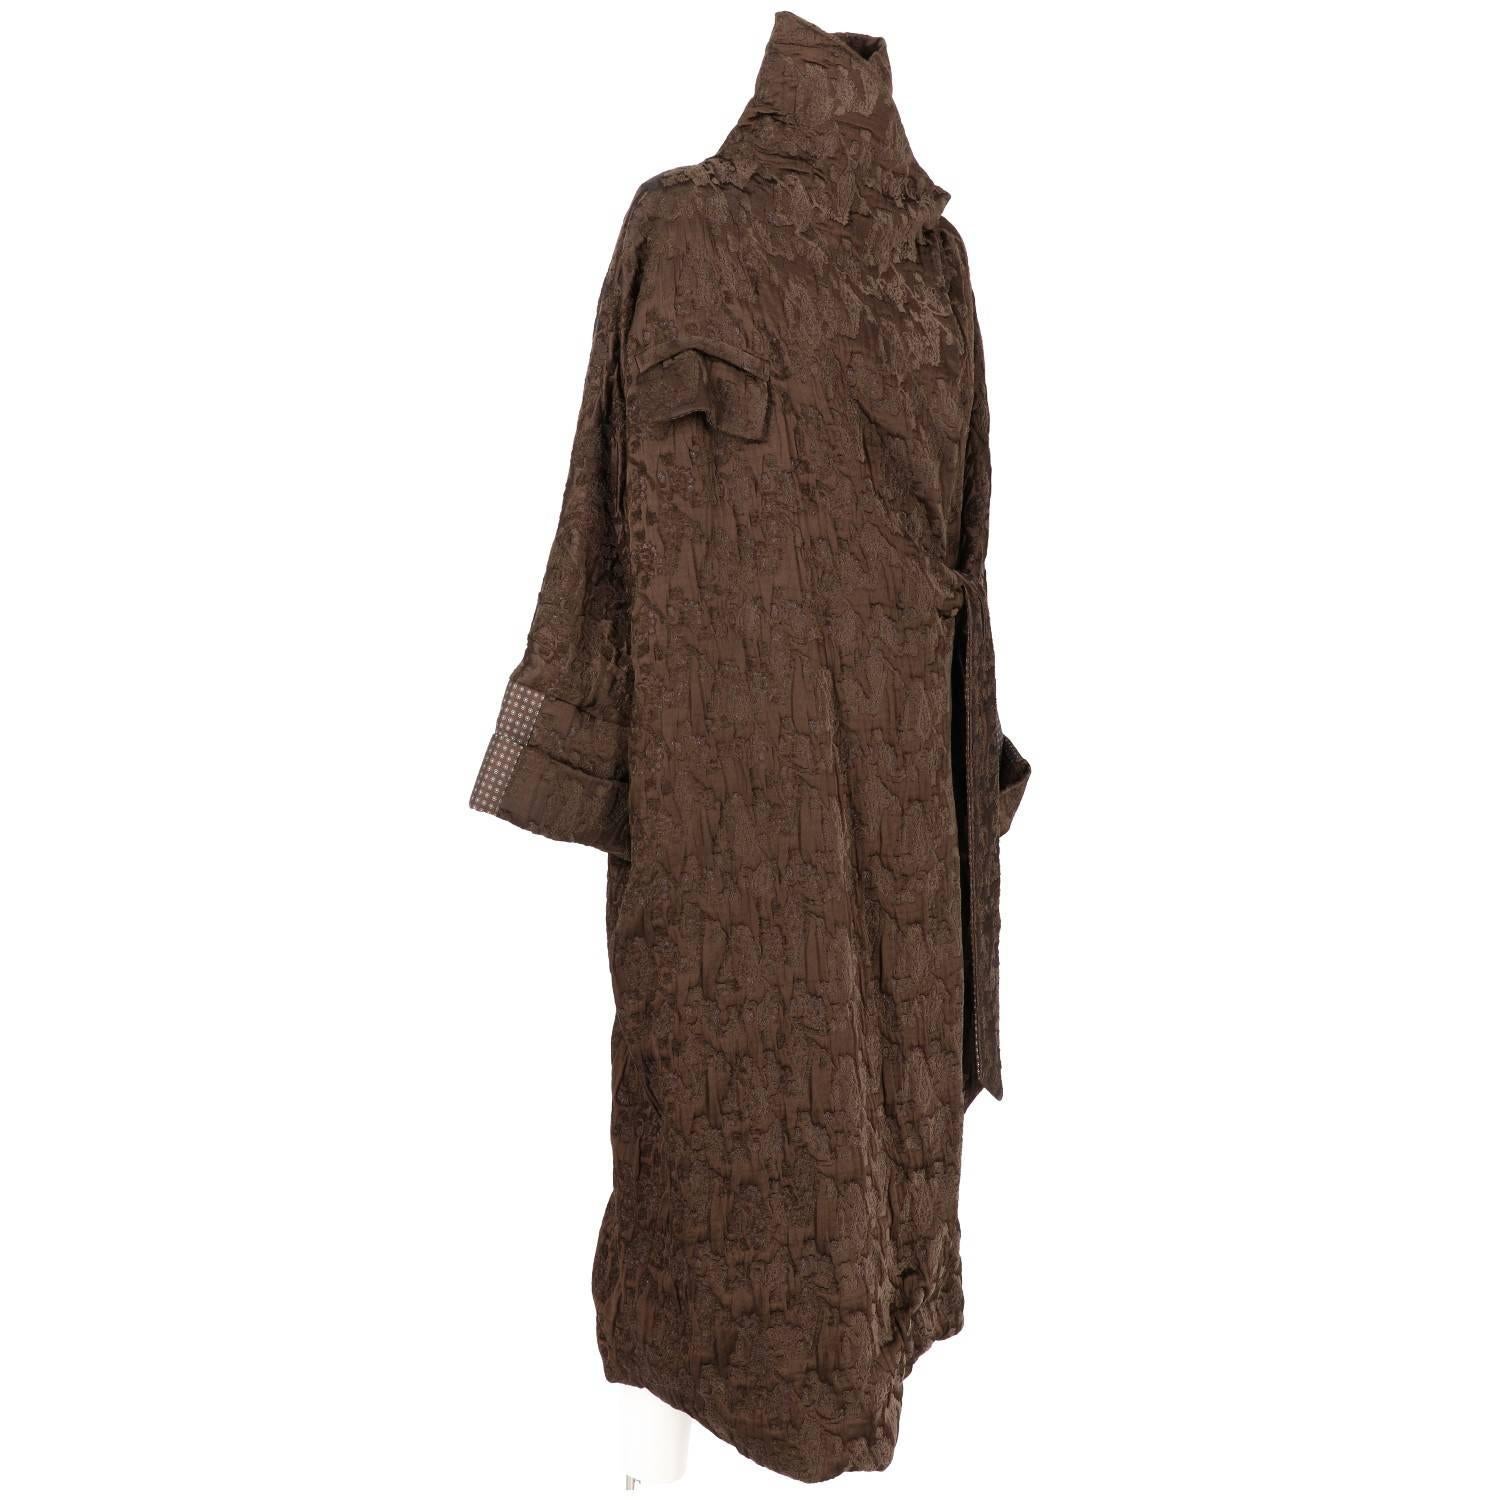 Antonio Marras majestic long baggy overcoat in brown jacquard fabric with inserts of a floral patterned fabric. It features a destructured asymmetrical shape, waistband closure and a button on the left shoulder. Lined in brown. The item is vintage